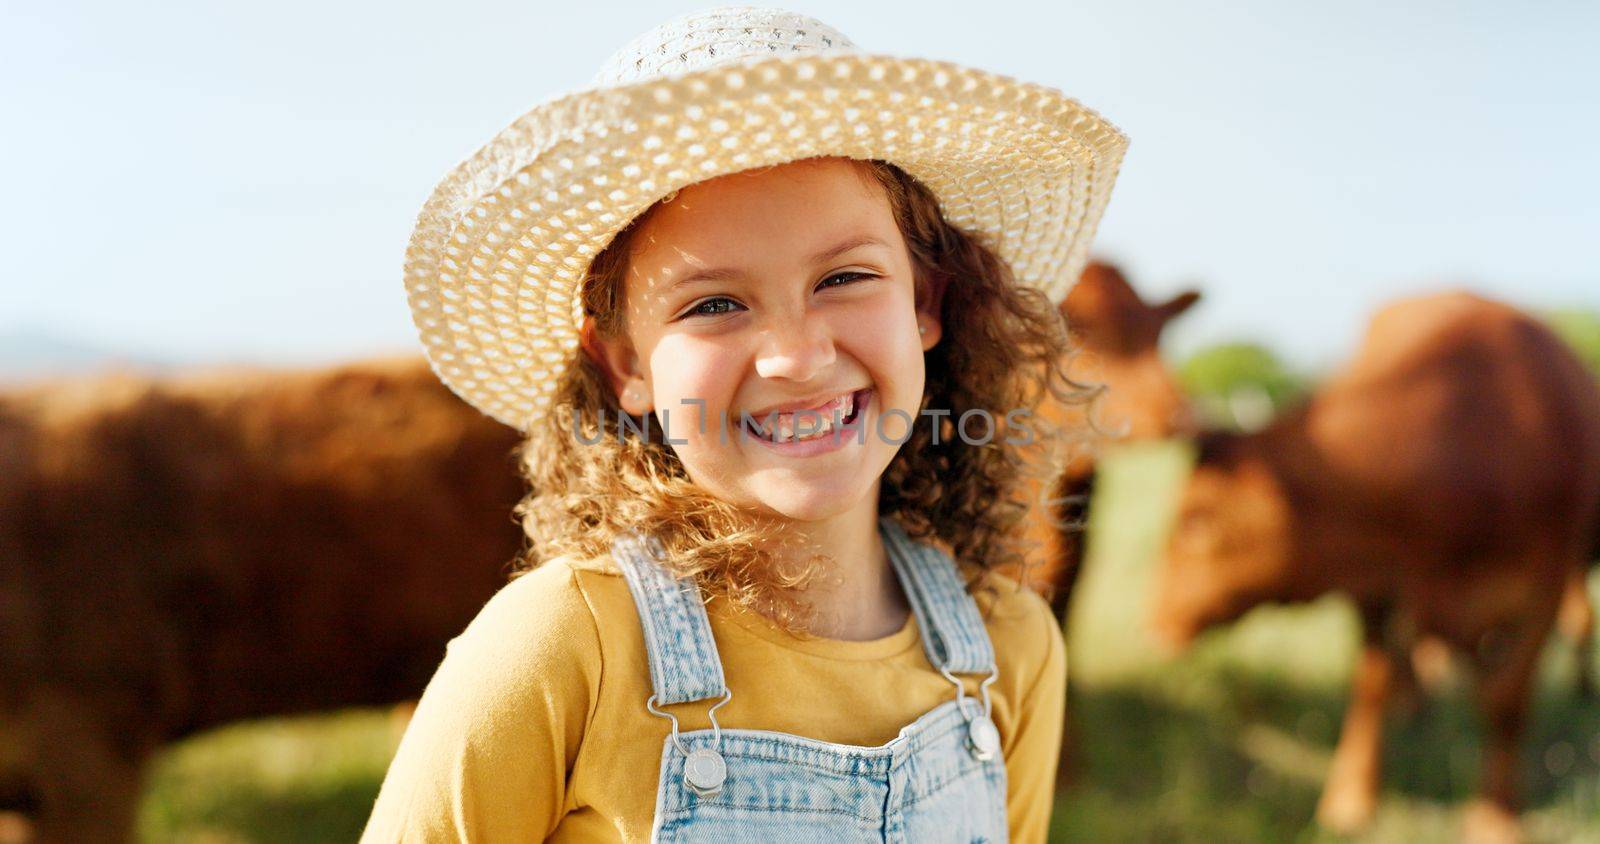 Happy little girl, portrait smile and farm with animals enjoying travel and nature in the countryside. Child smiling in happiness for agriculture, life and sustainability in farming and cattle.